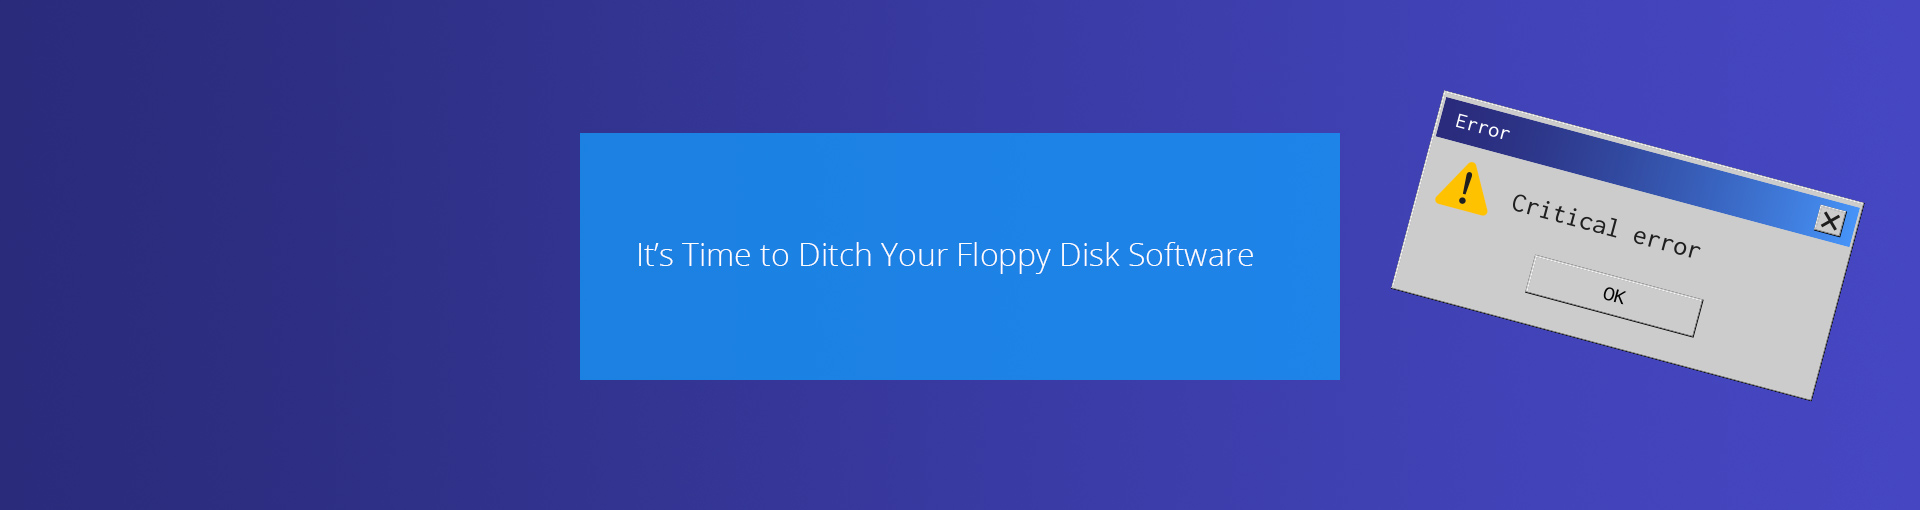 It’s Time to Ditch Your Floppy Disk Software Featured Image